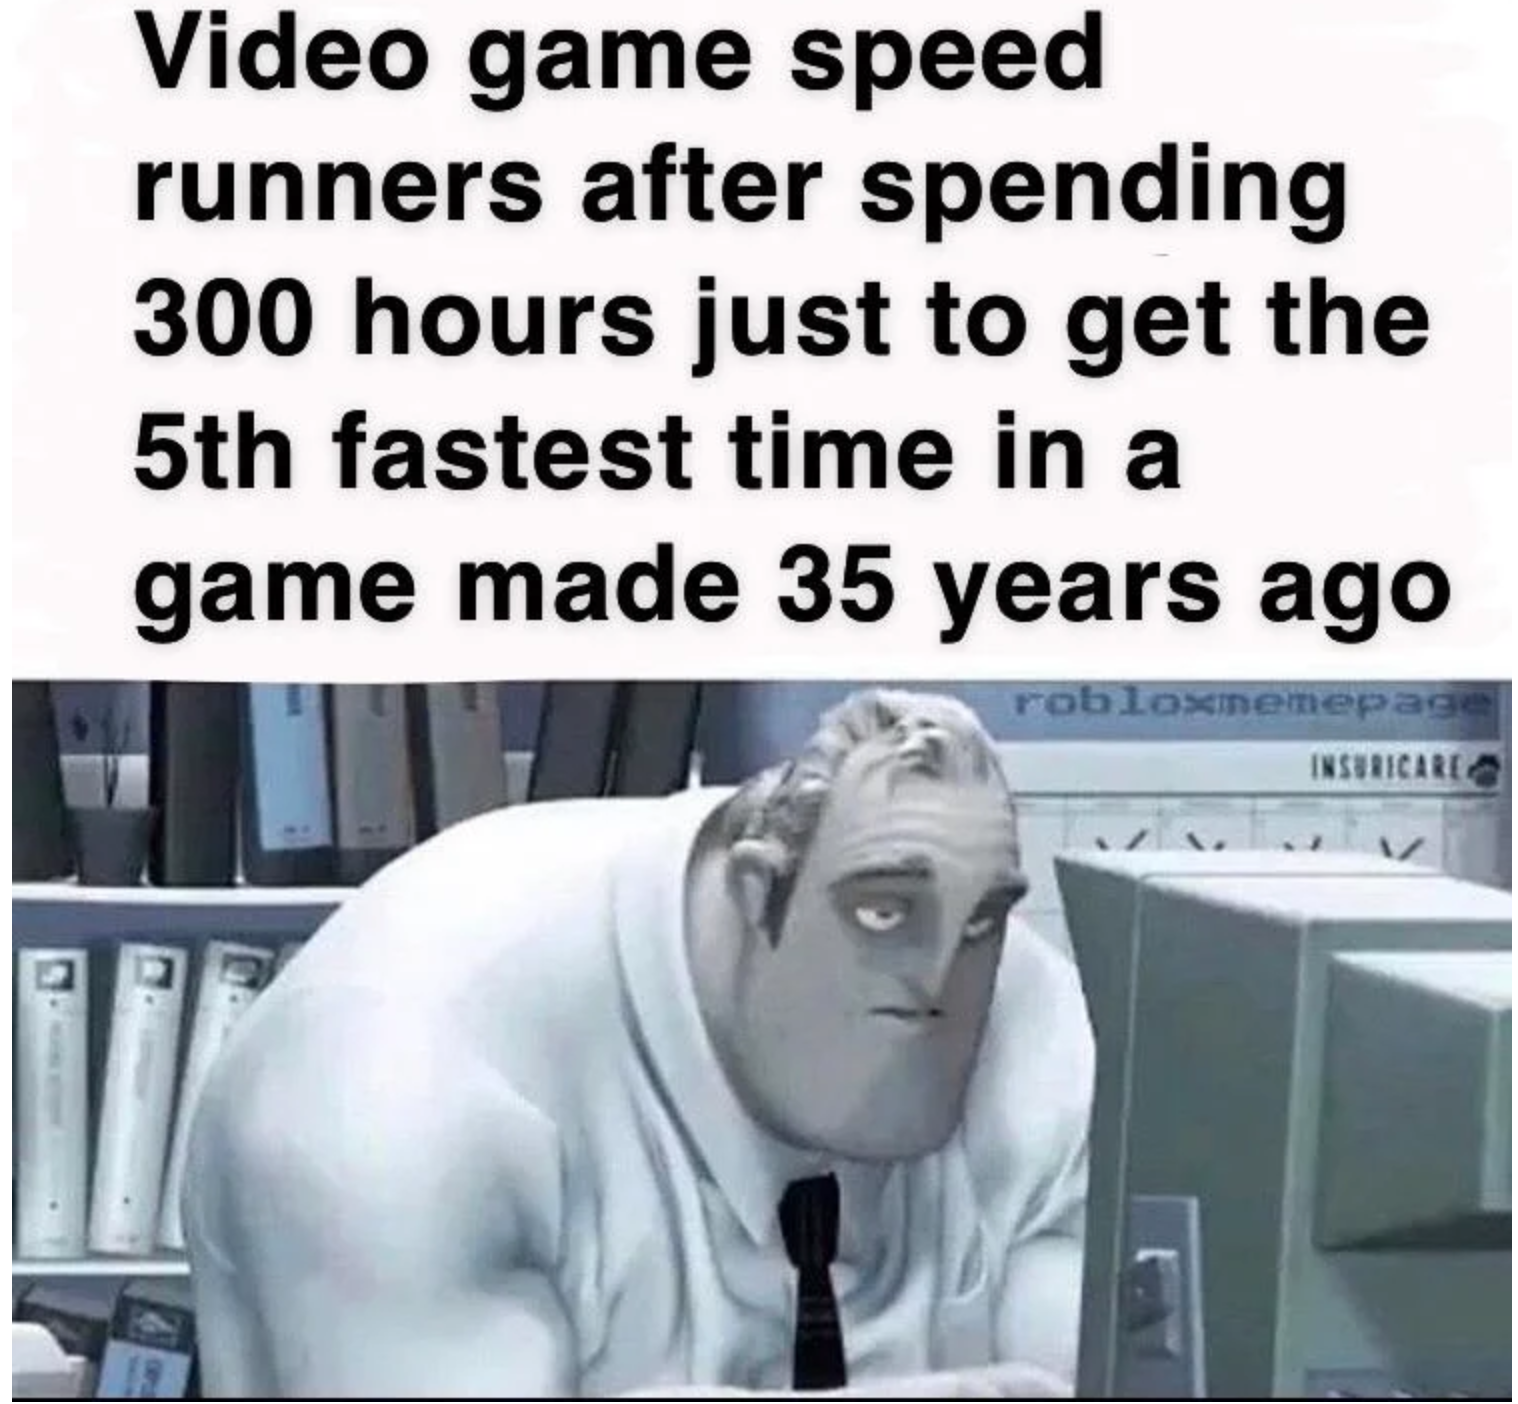 boring work meme - Video game speed runners after spending 300 hours just to get the 5th fastest time in a game made 35 years ago robloxmenepage Insidical